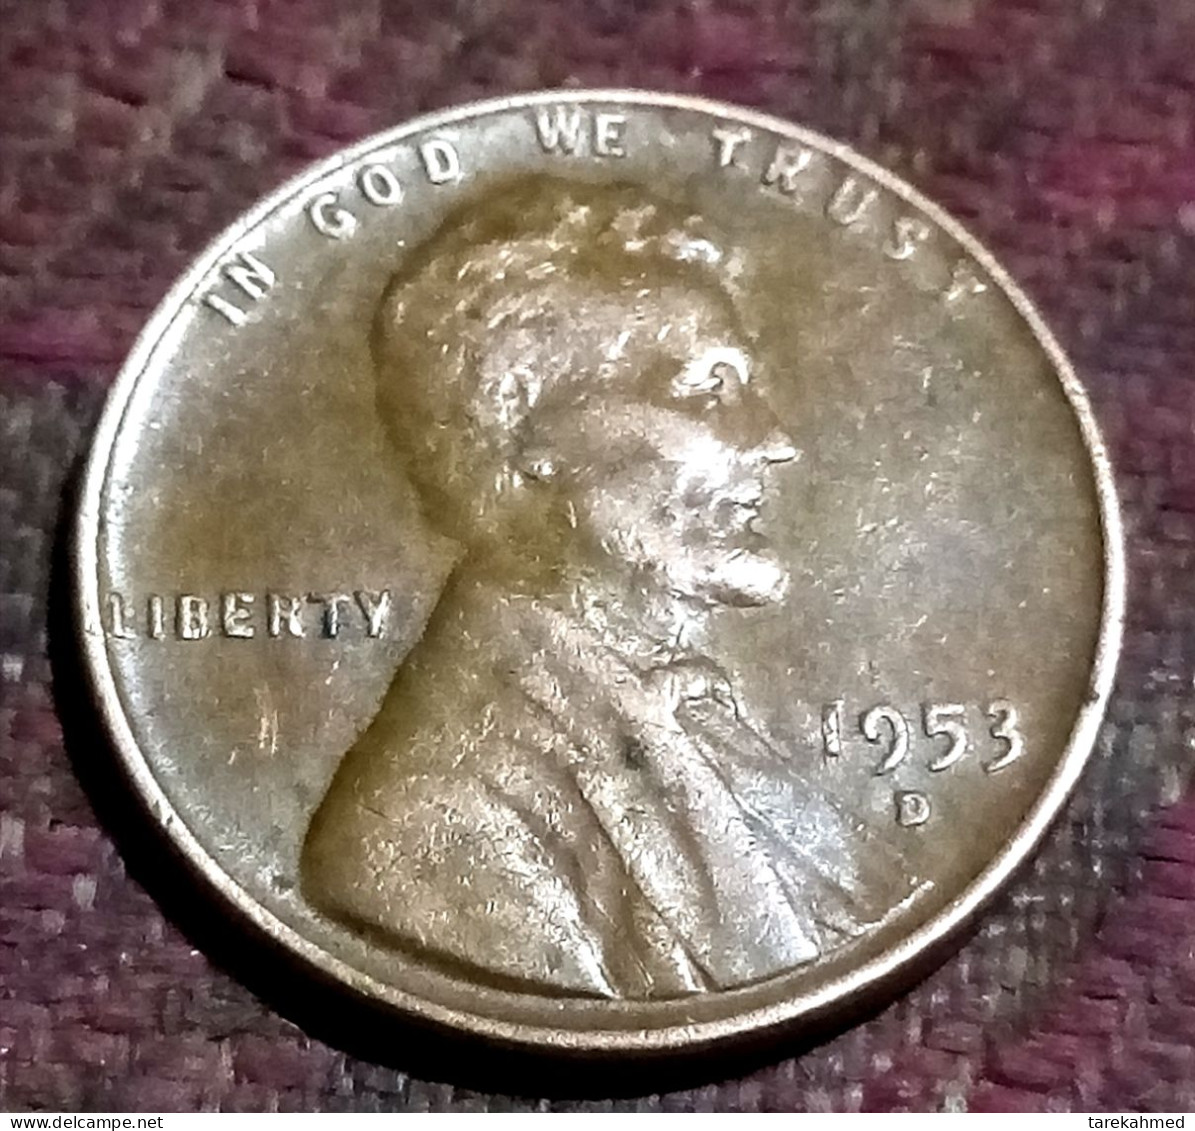 LINCOLN WHEAT PENNY 1953-D, Double Die & Deformity L IN LIBERTY ON Rim. Gomaa - 1909-1958: Lincoln, Wheat Ears Reverse